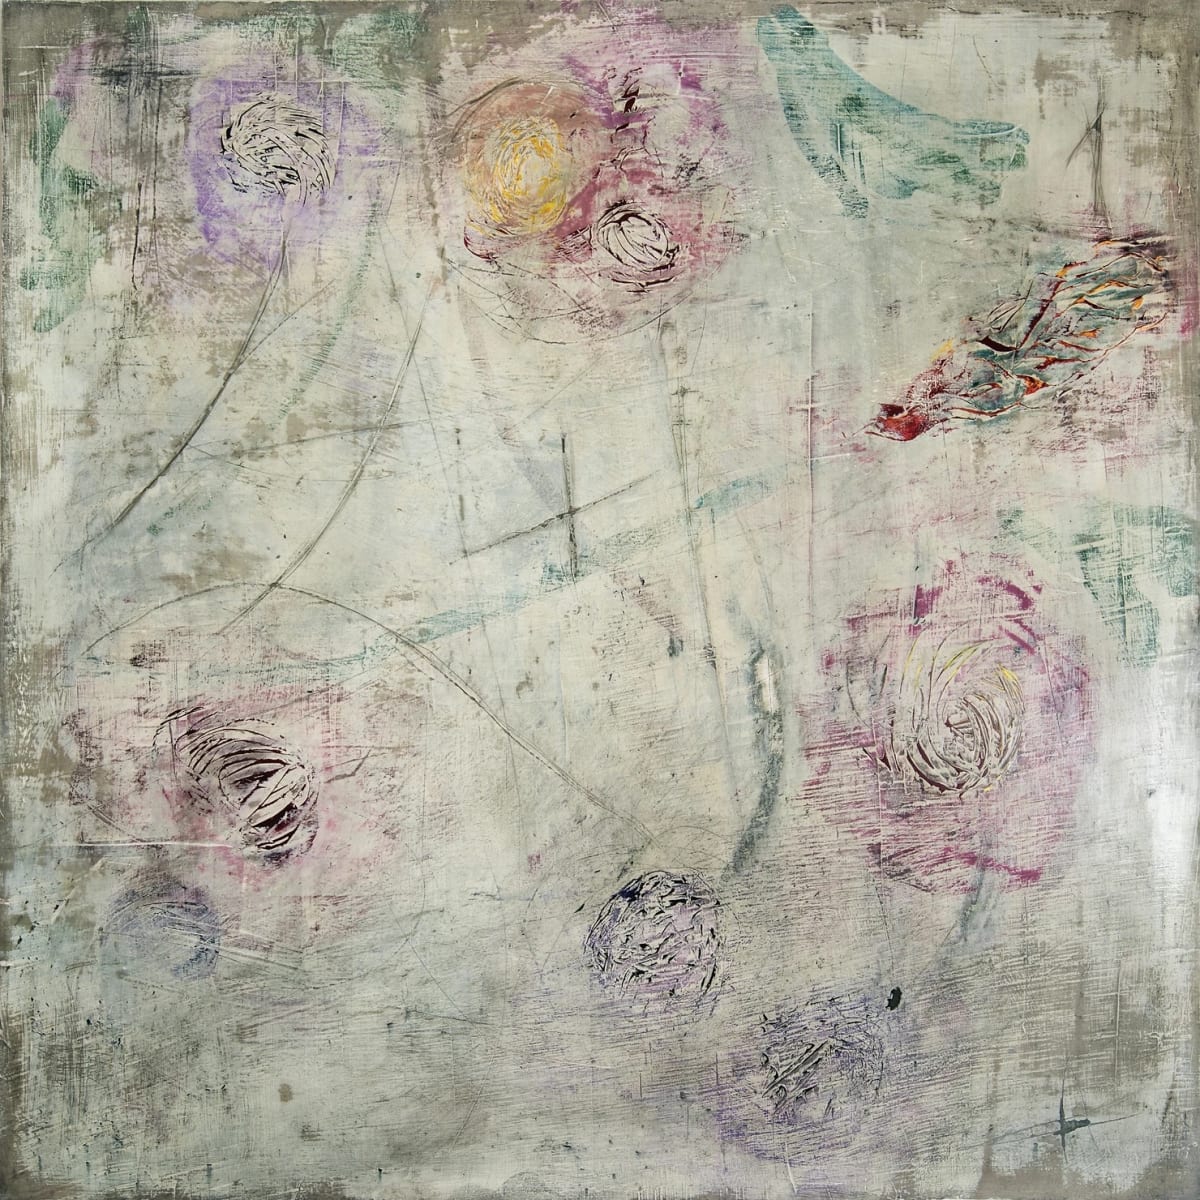 Fresco by John Worth  Image: Large square abstract floral painting on wood panel.